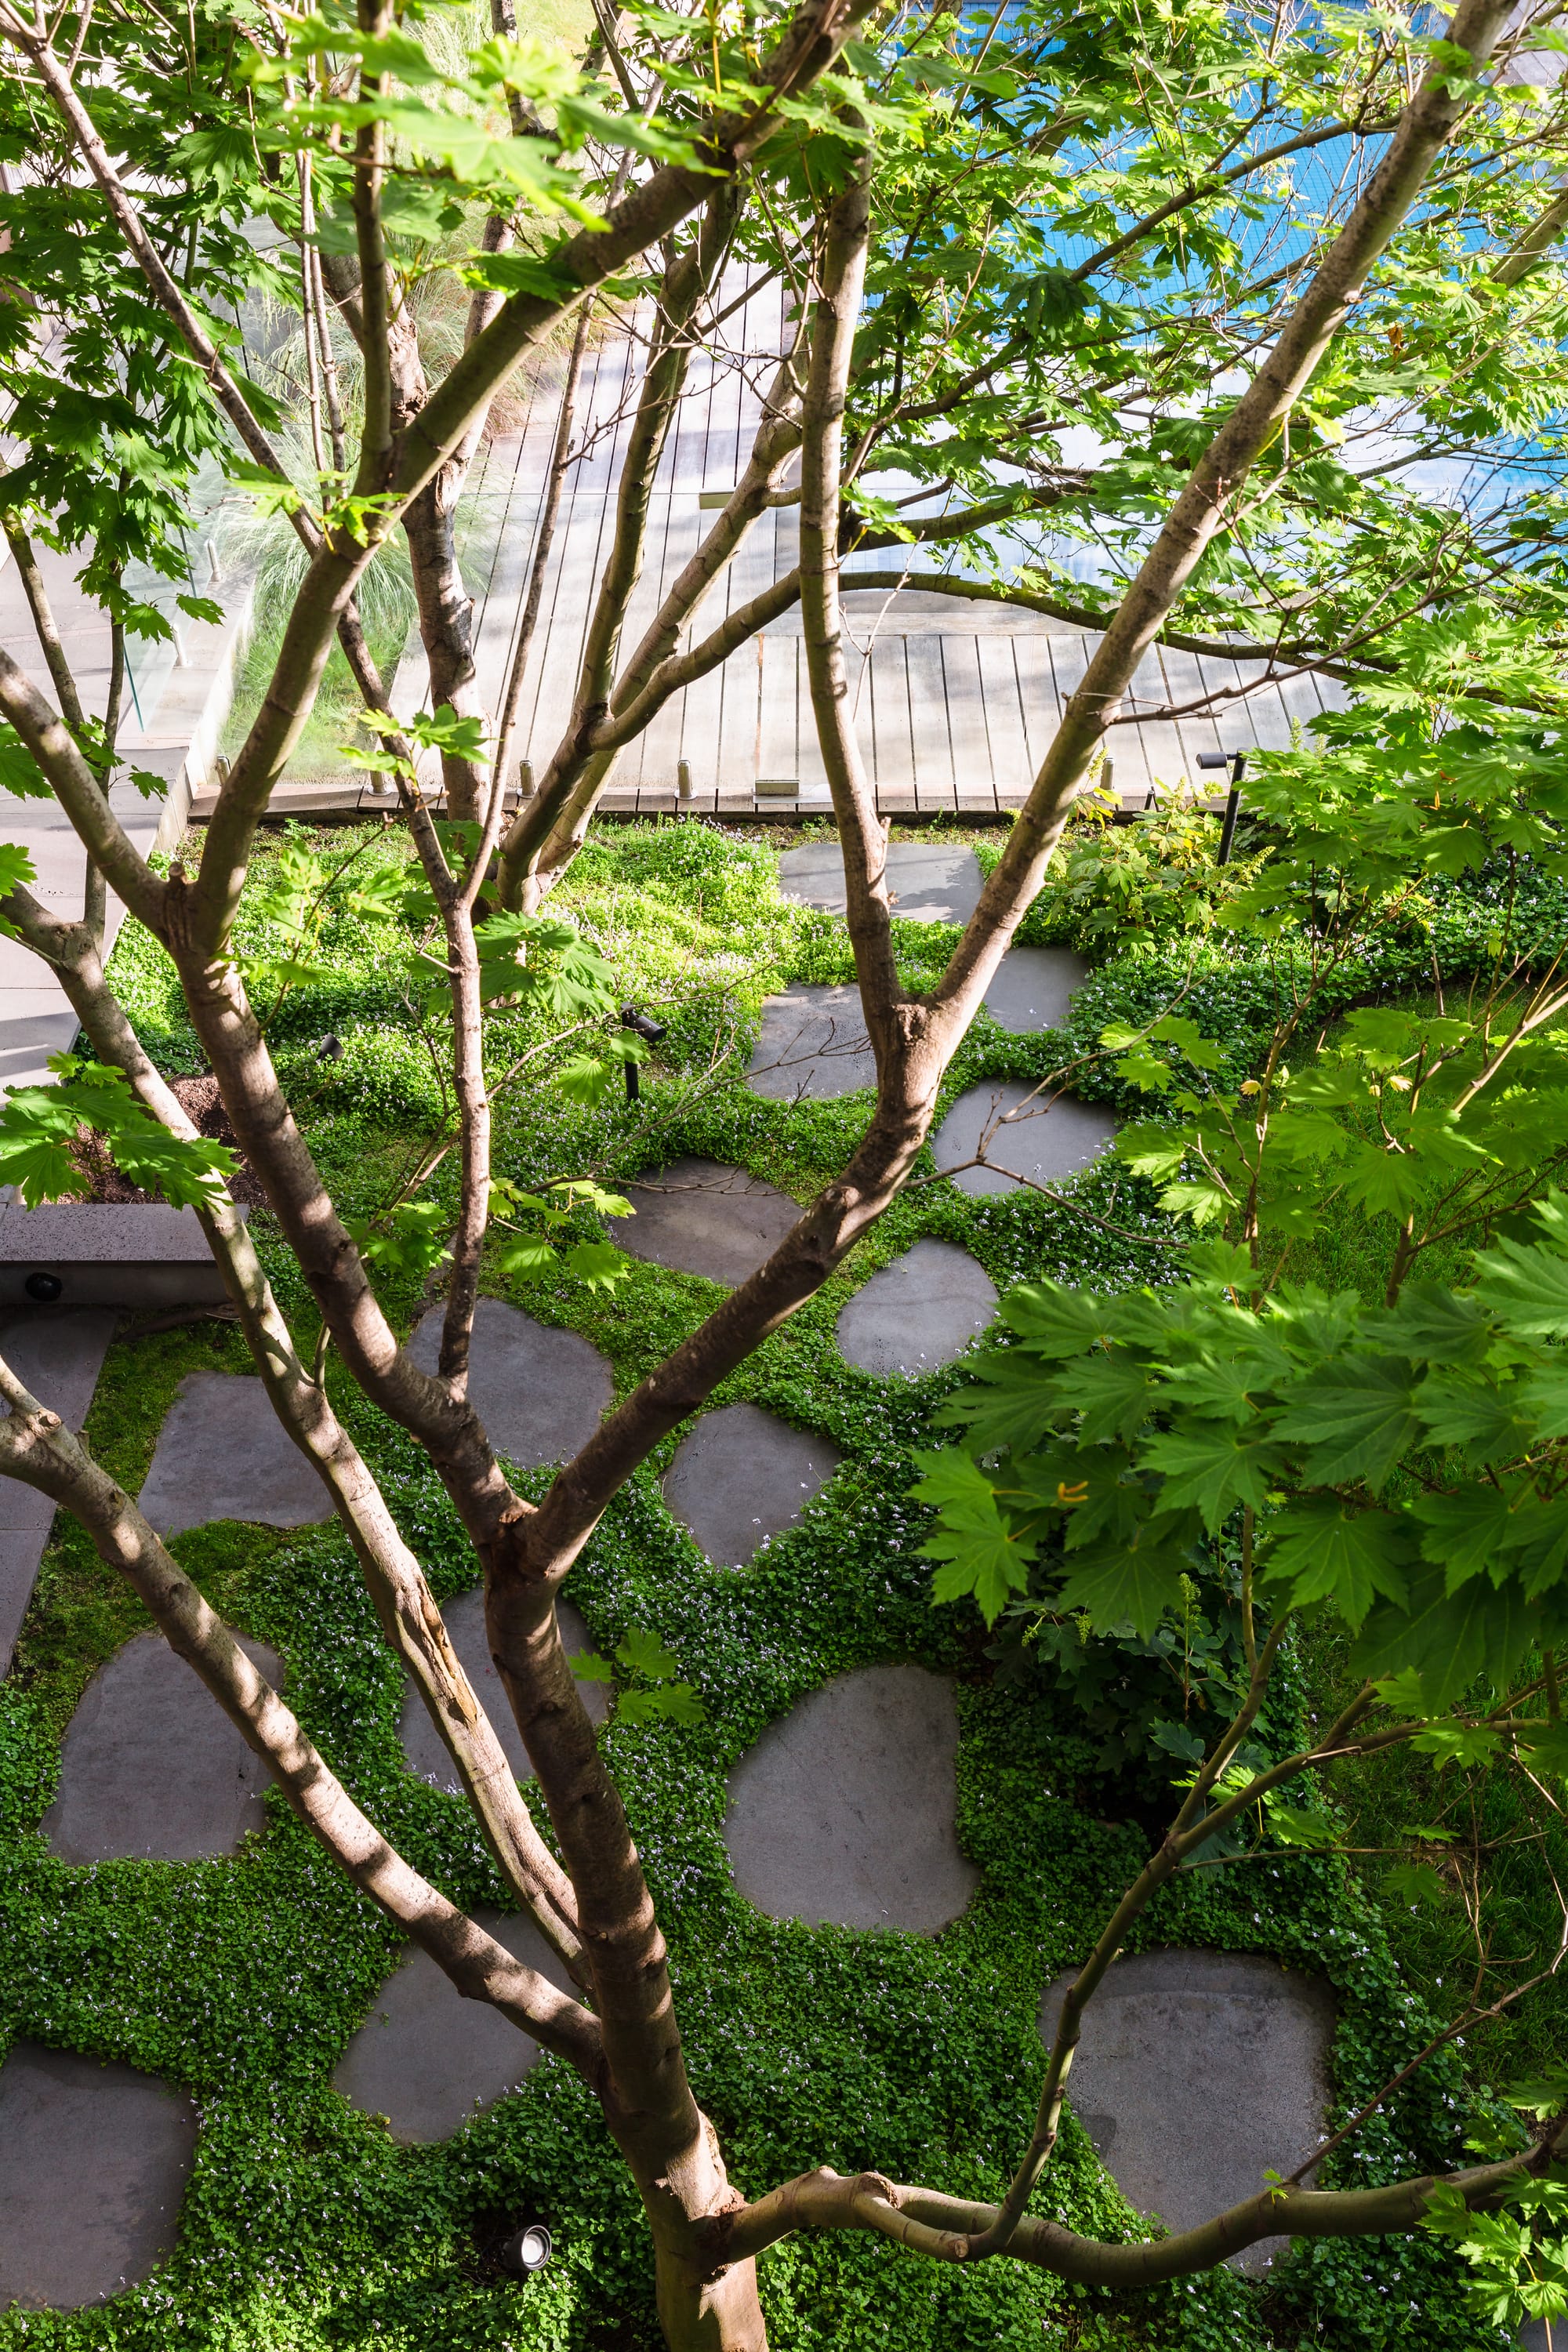 Wills Kew by Julie Crowe Landscape Design. Photography by Erik Holt Photography. Birds eye view of ground cover plants growing between the pavers in an outdoor garden. Poll with timber deck visible in top right corner. Image taken through branches of a tree. 